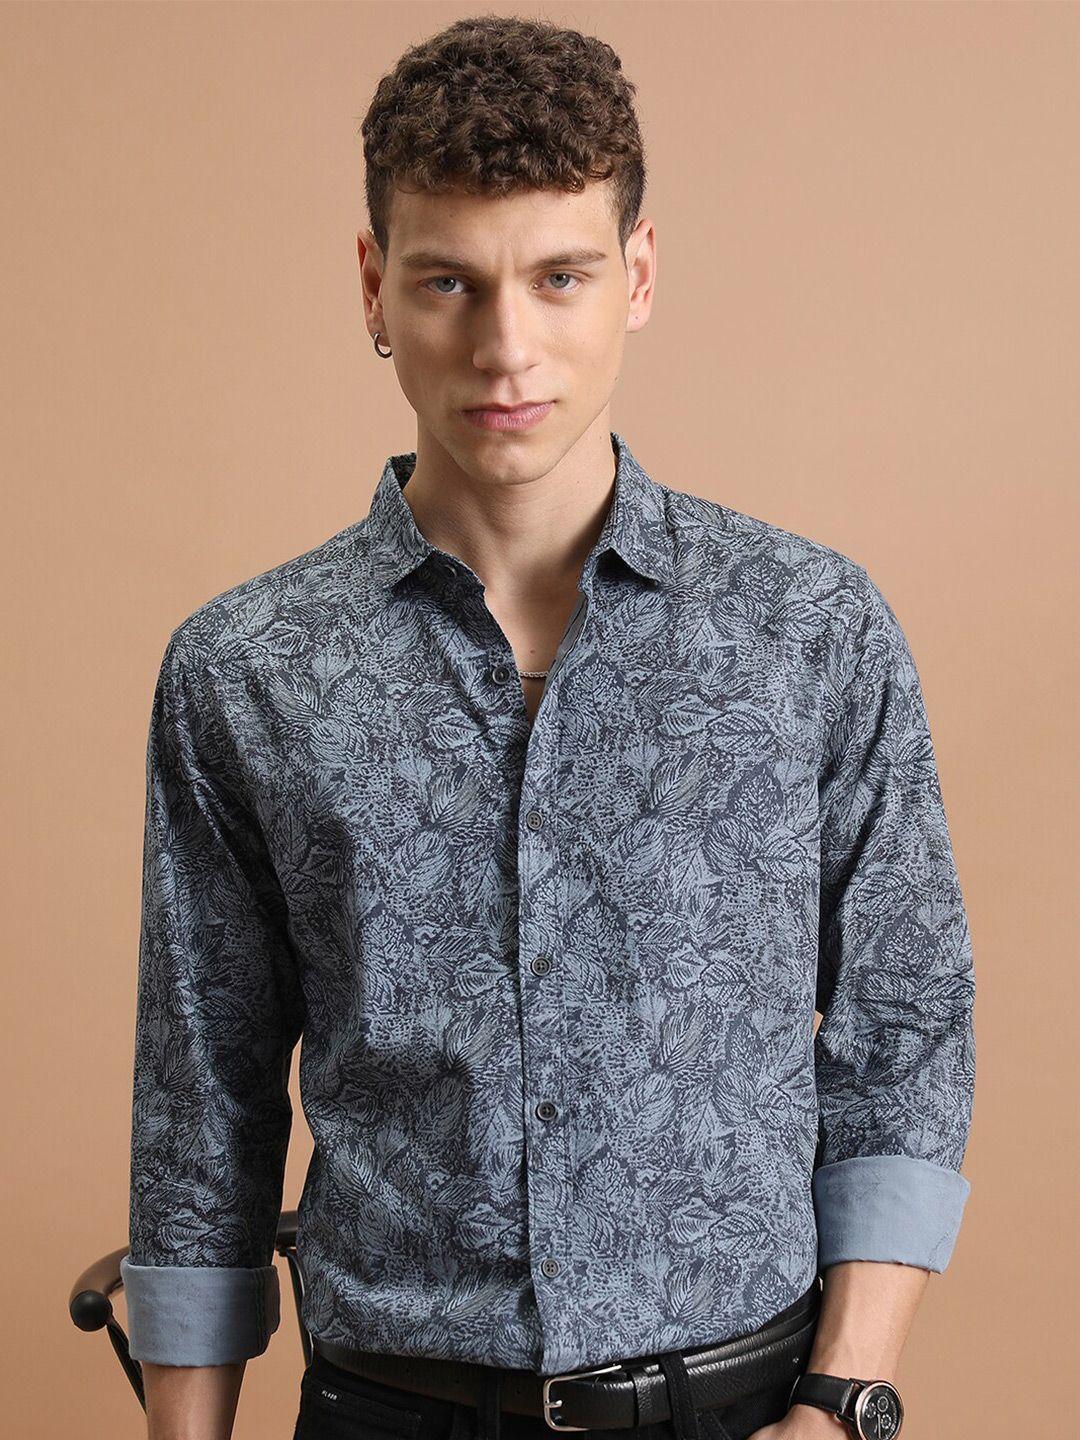 highlander slim fit all over floral printed cotton casual shirt